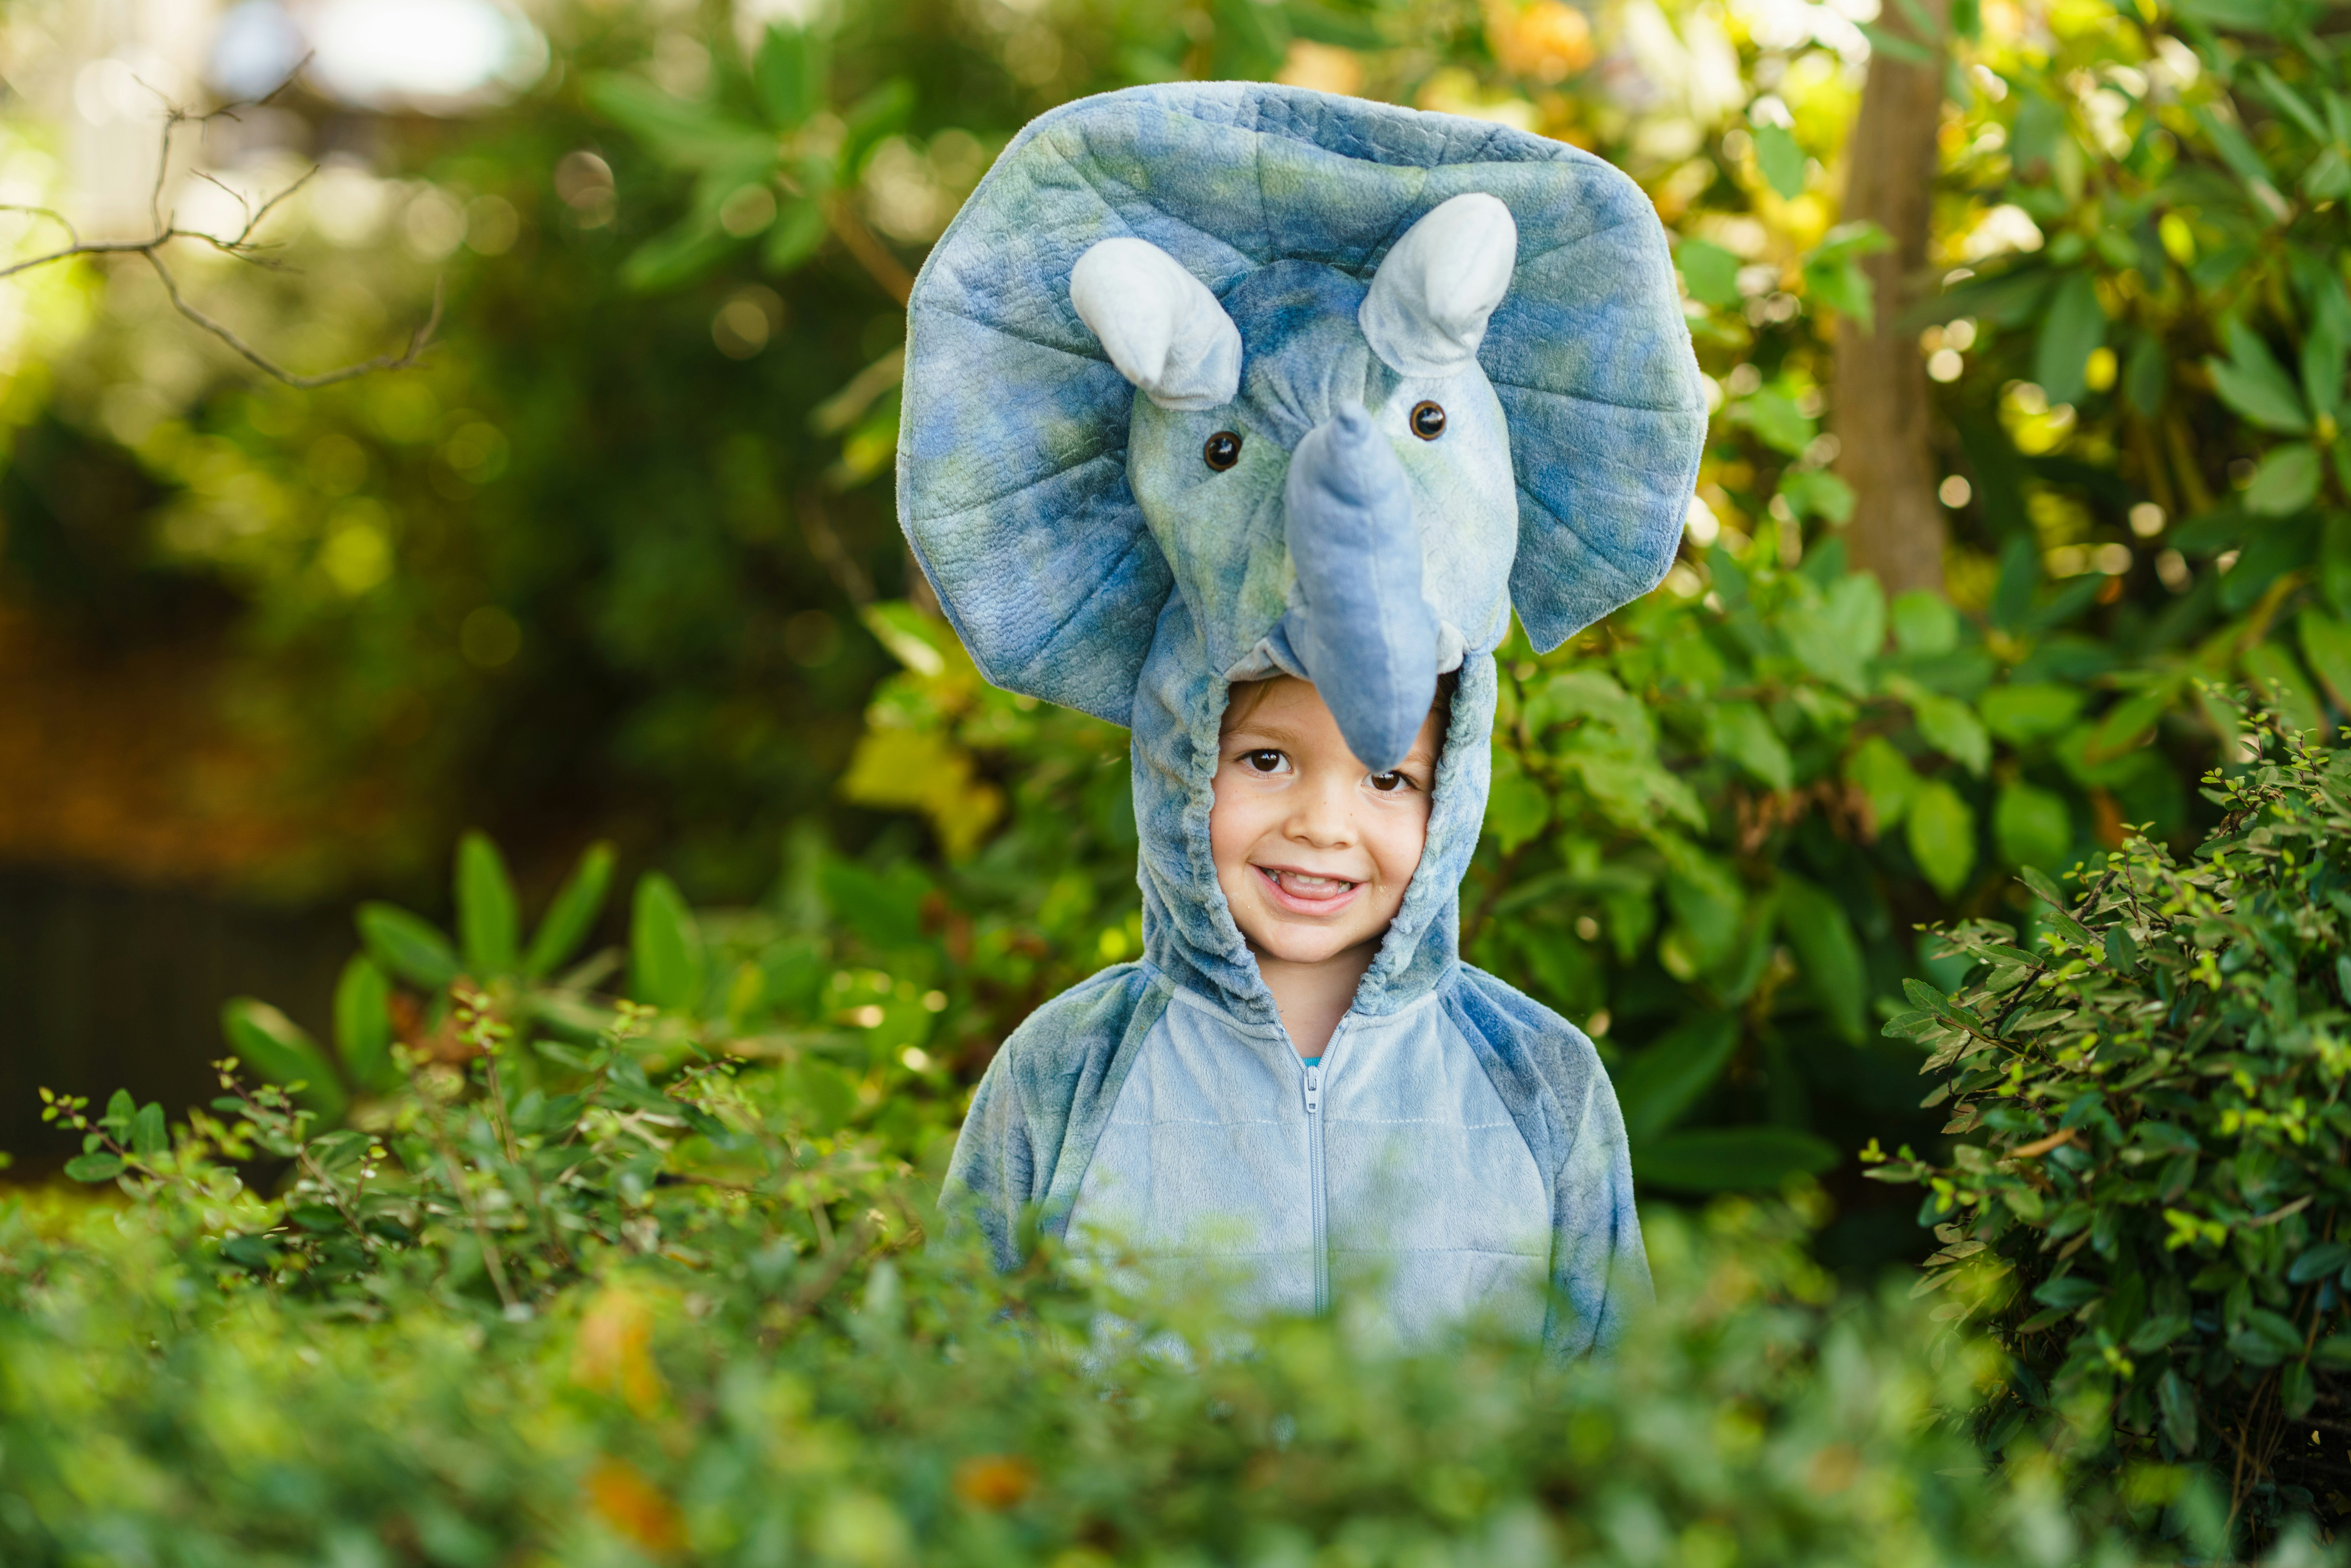 Judah dressing up as a triceratops for Halloween.